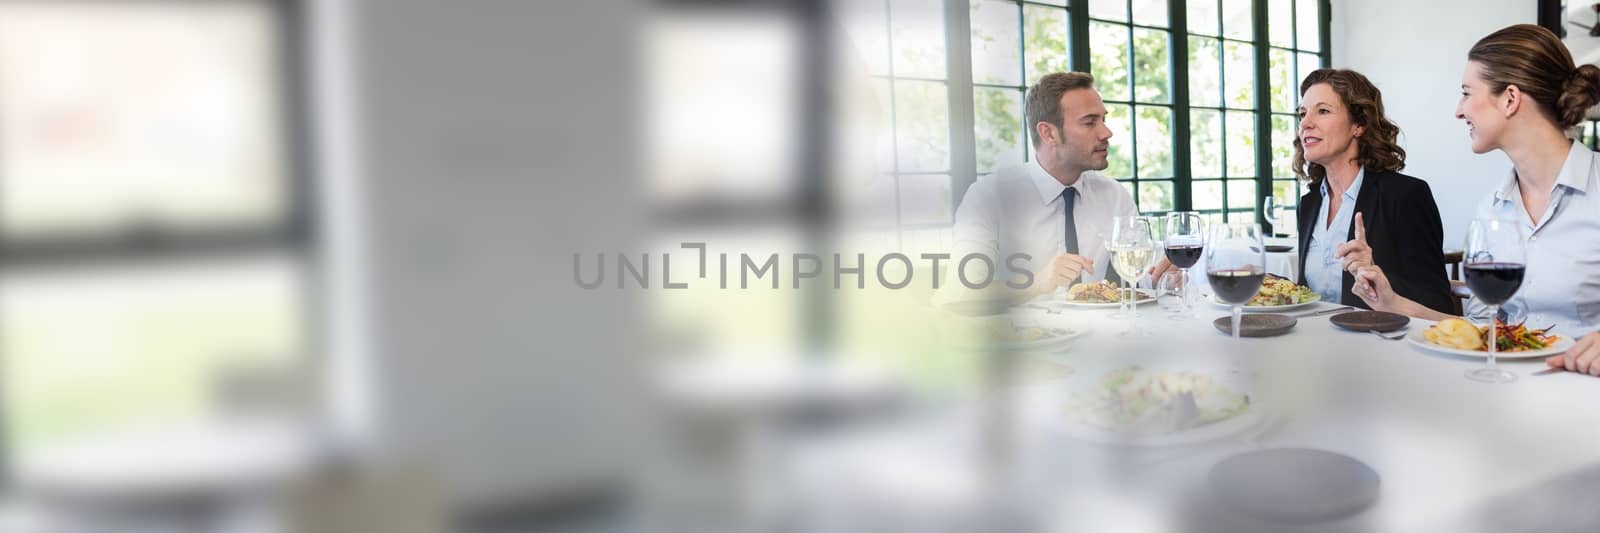 Digital composite of Business people having a meeting with windows transition effect